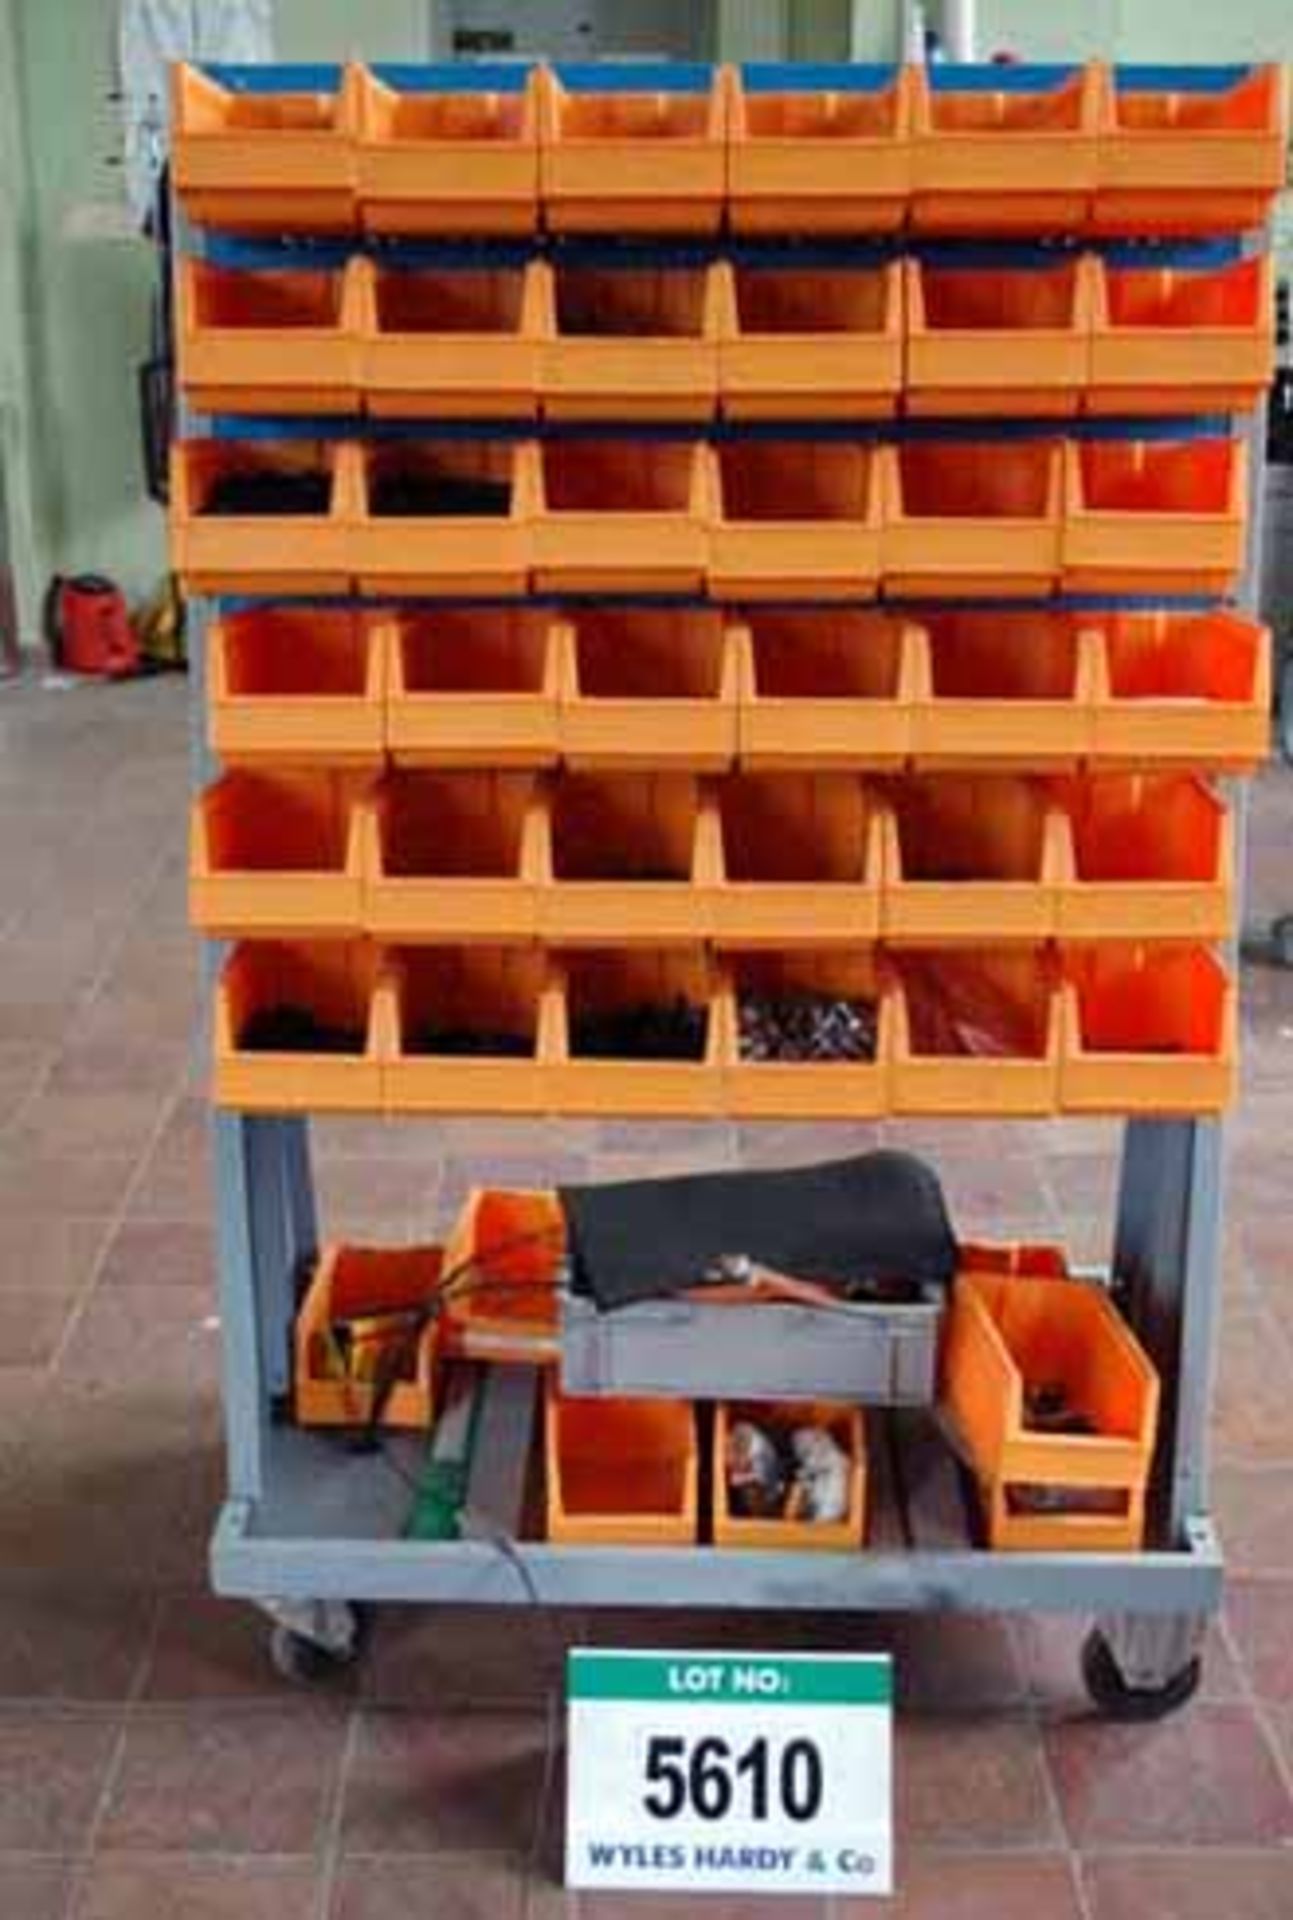 A Mobile Grey & Blue Steel Parts Rack, with Forty Five Orange Plastic Demountable Parts Bins &